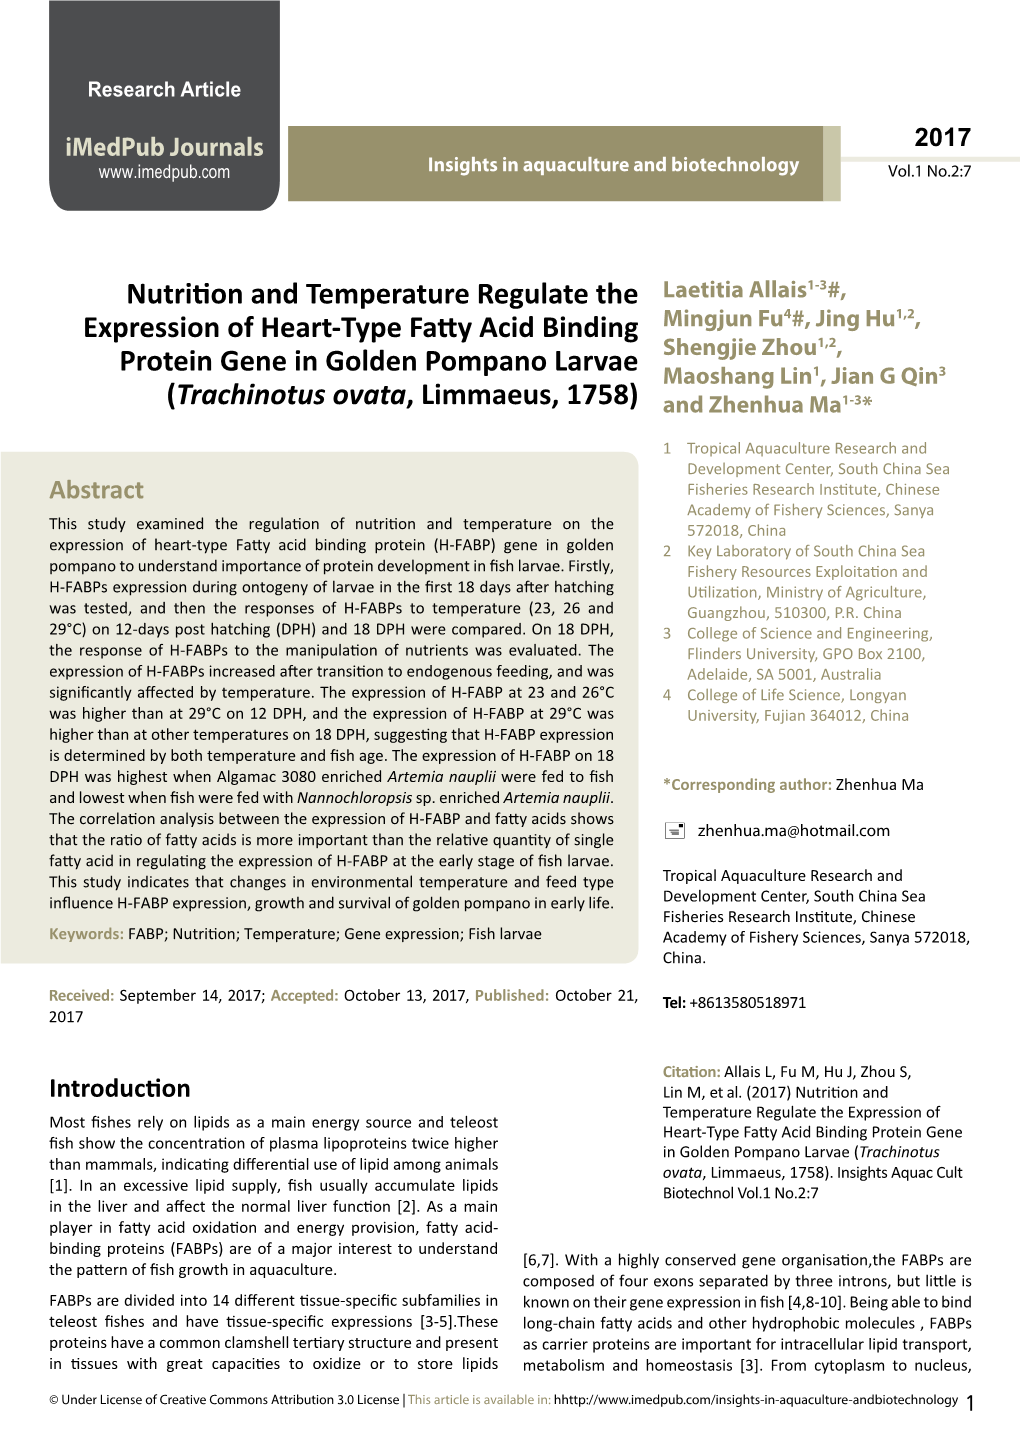 Nutrition and Temperature Regulate the Expression of Heart-Type Fatty Acid Binding Protein Gene in Golden Pompano Larvae (Trachi